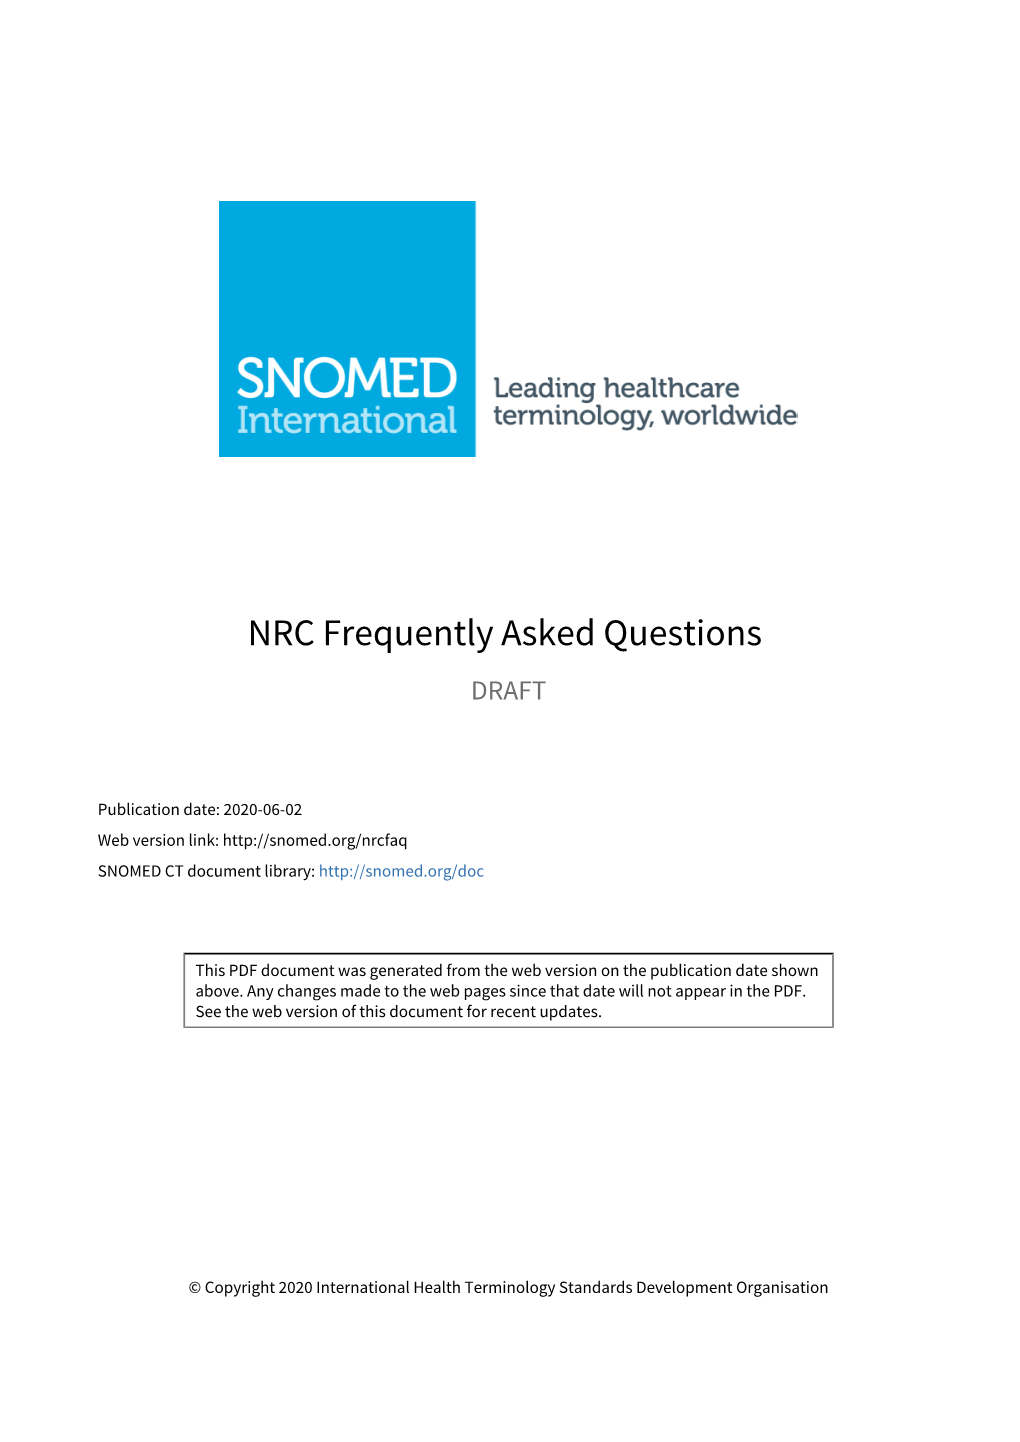 NRC Frequently Asked Questions DRAFT